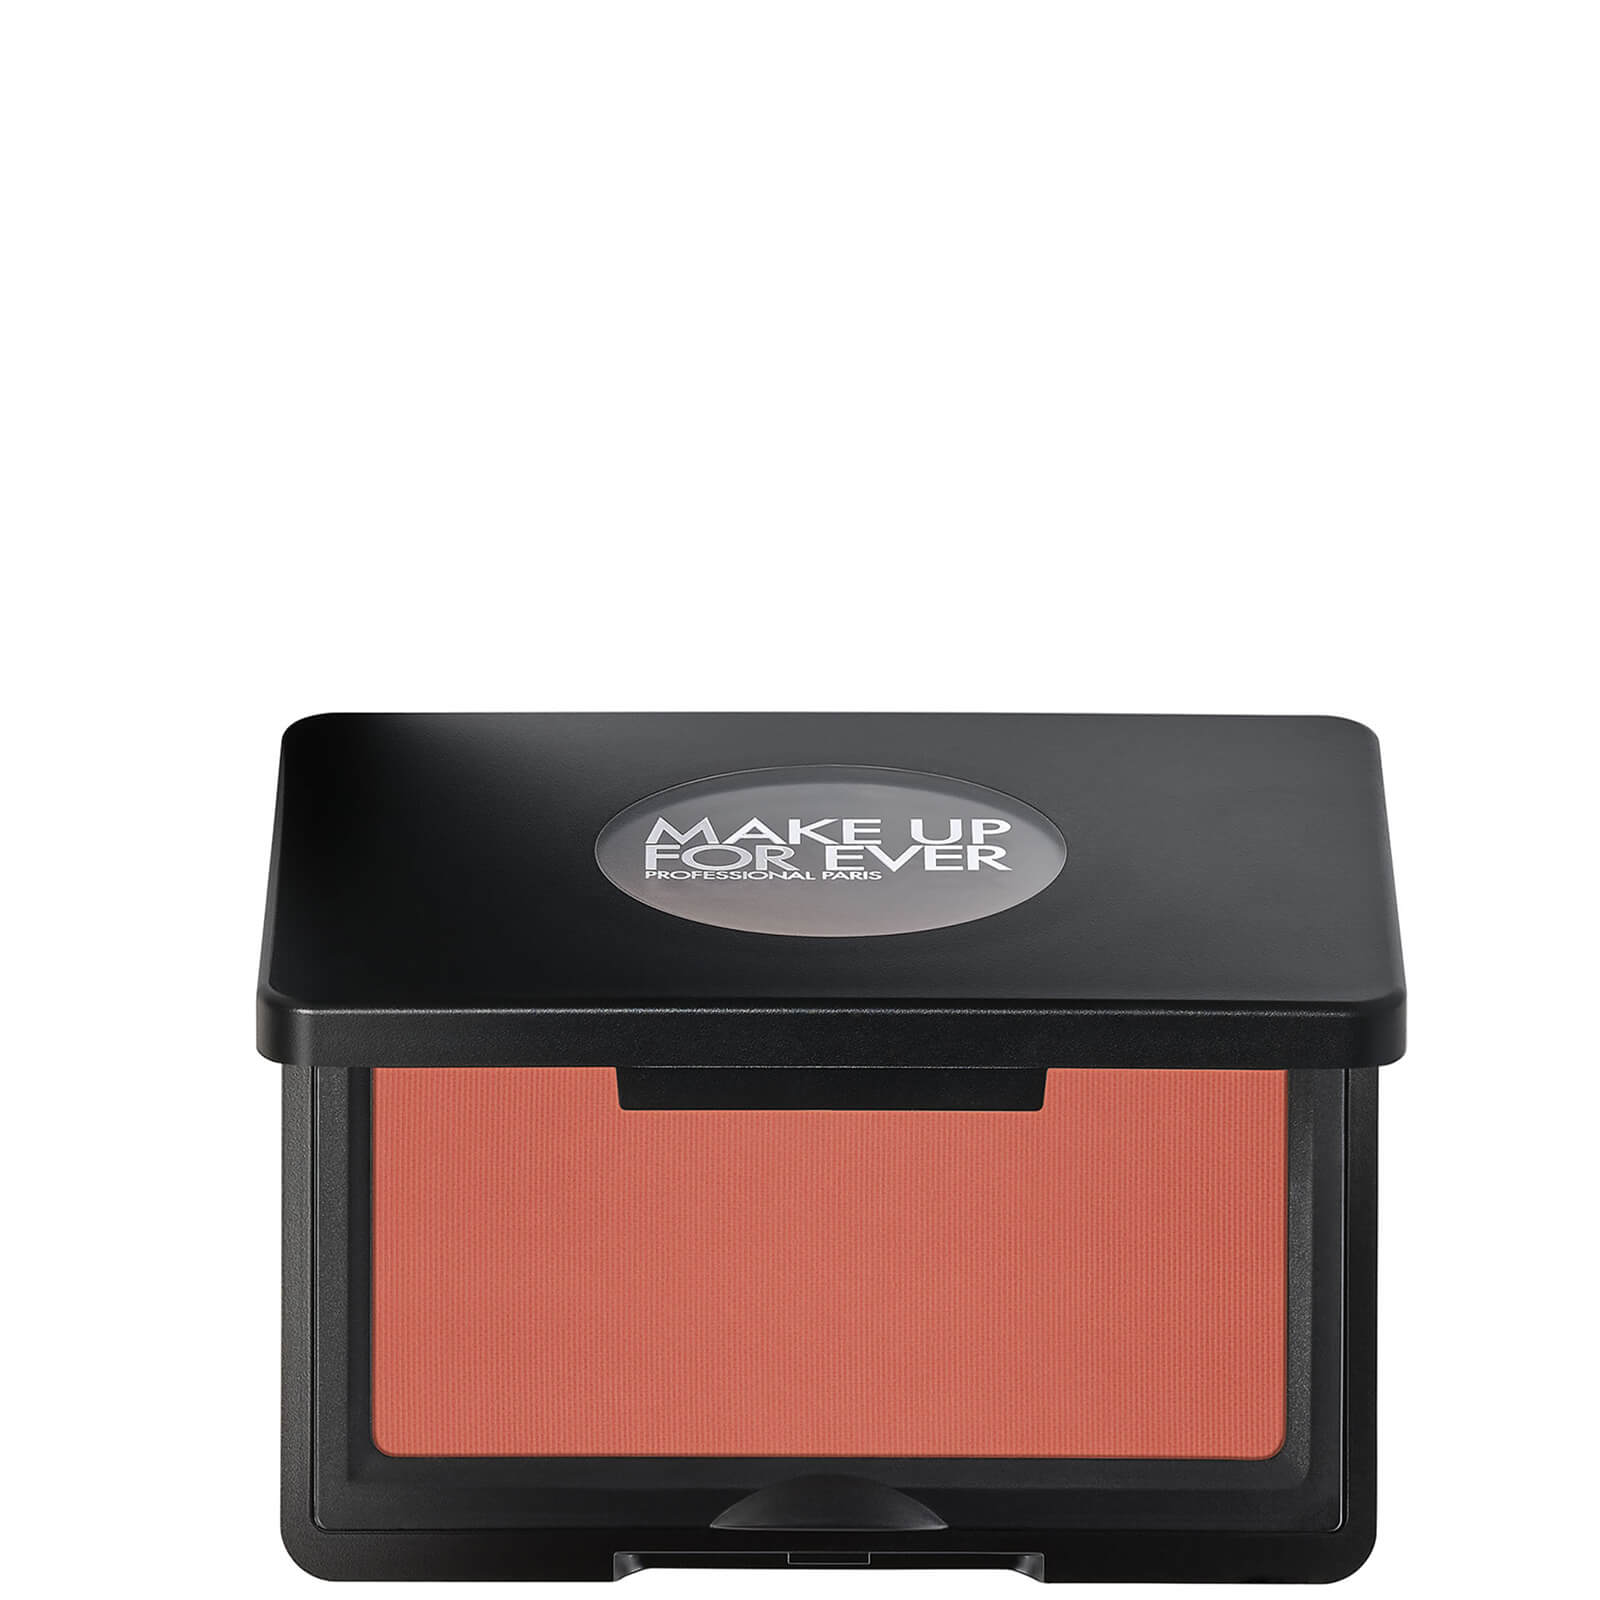 MAKE UP FOR EVER Artist Face Powders Blush 4g (Various Shades) - B320 - Charming Poppy